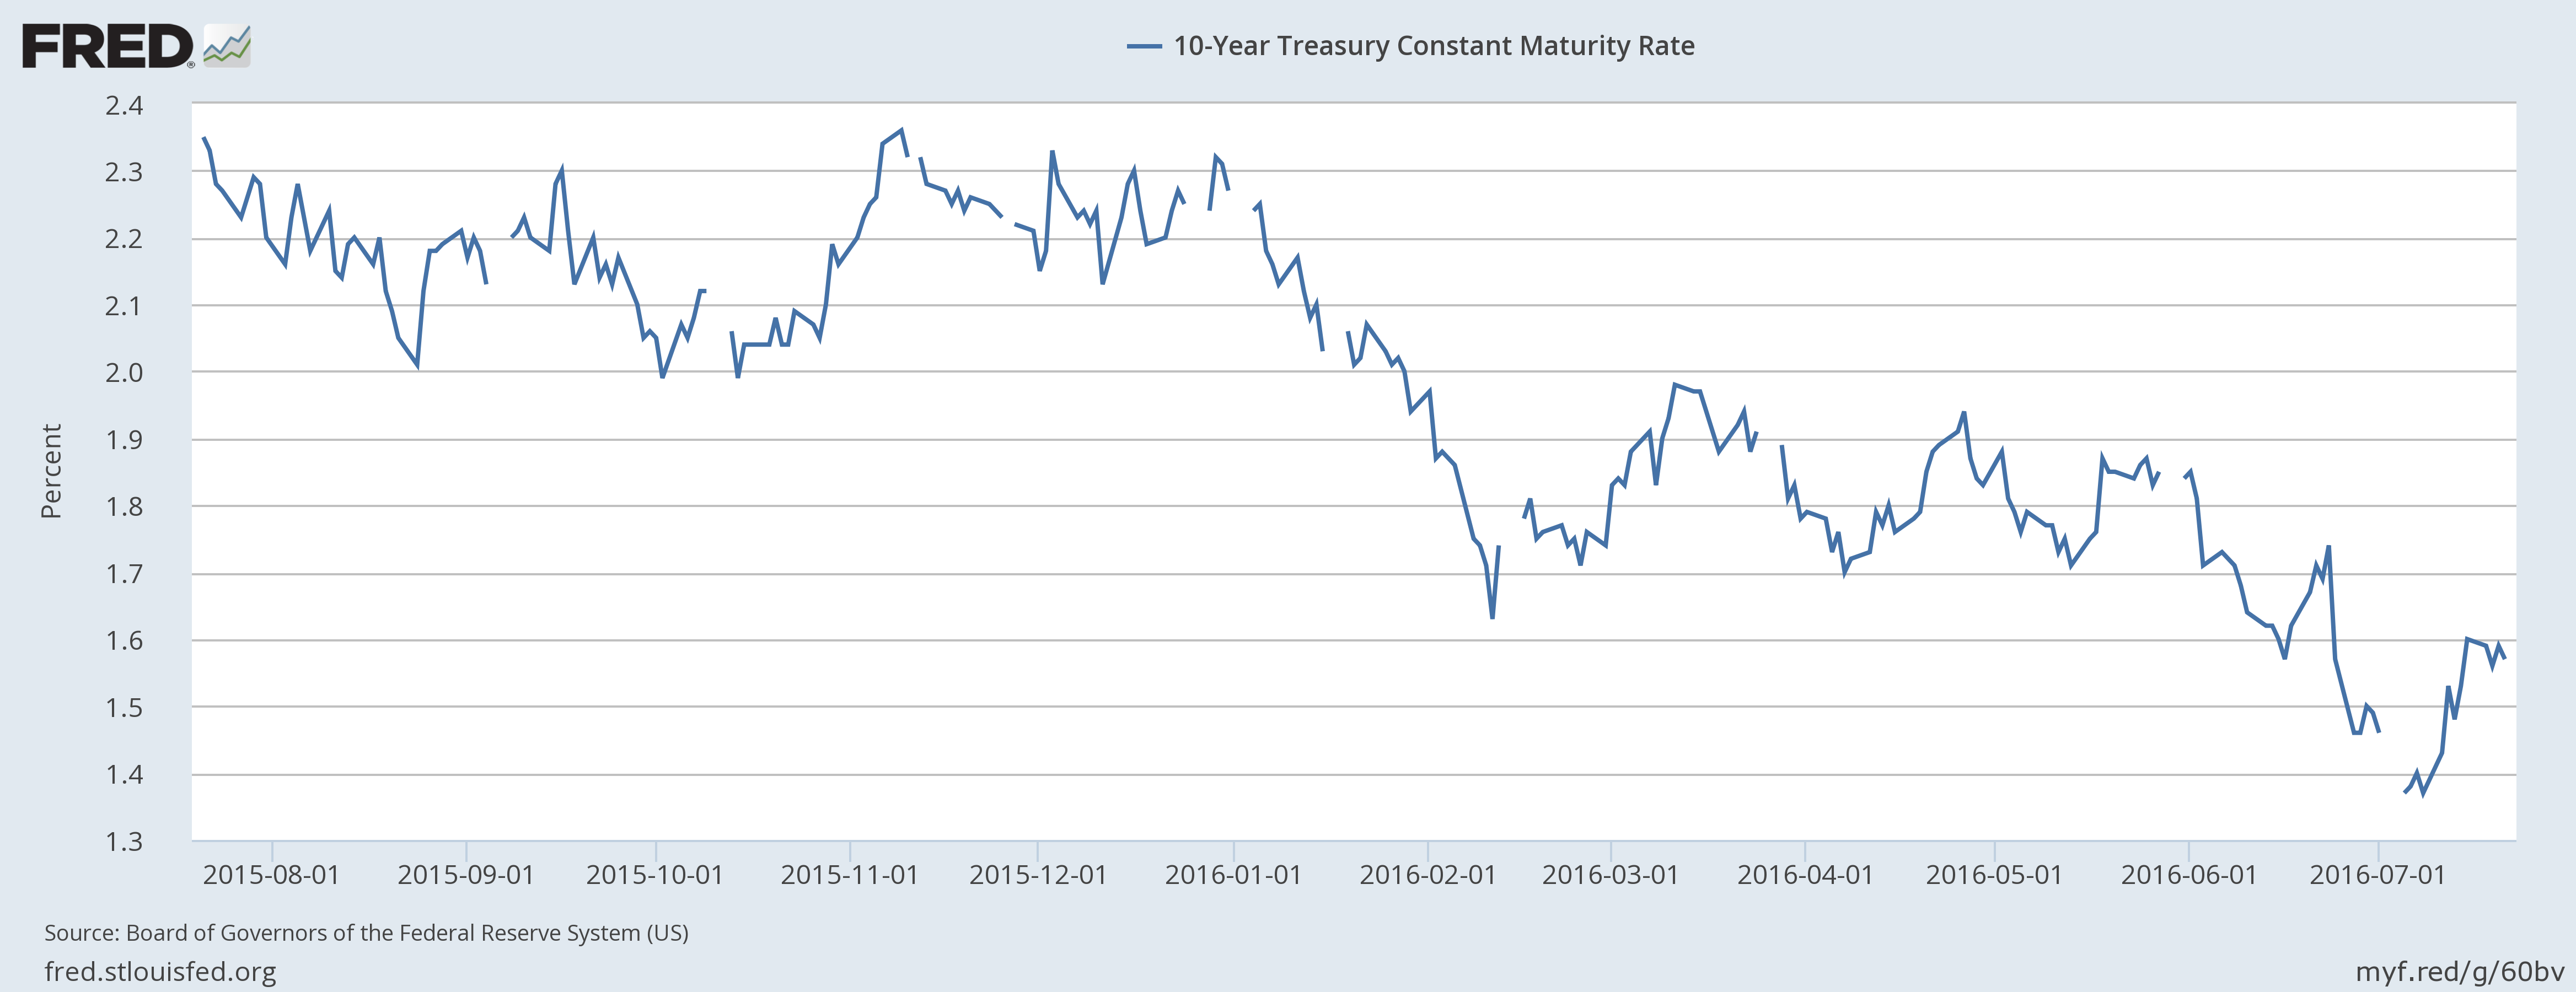 10-Year Treasury Constant Maturity Rate 2015-2016